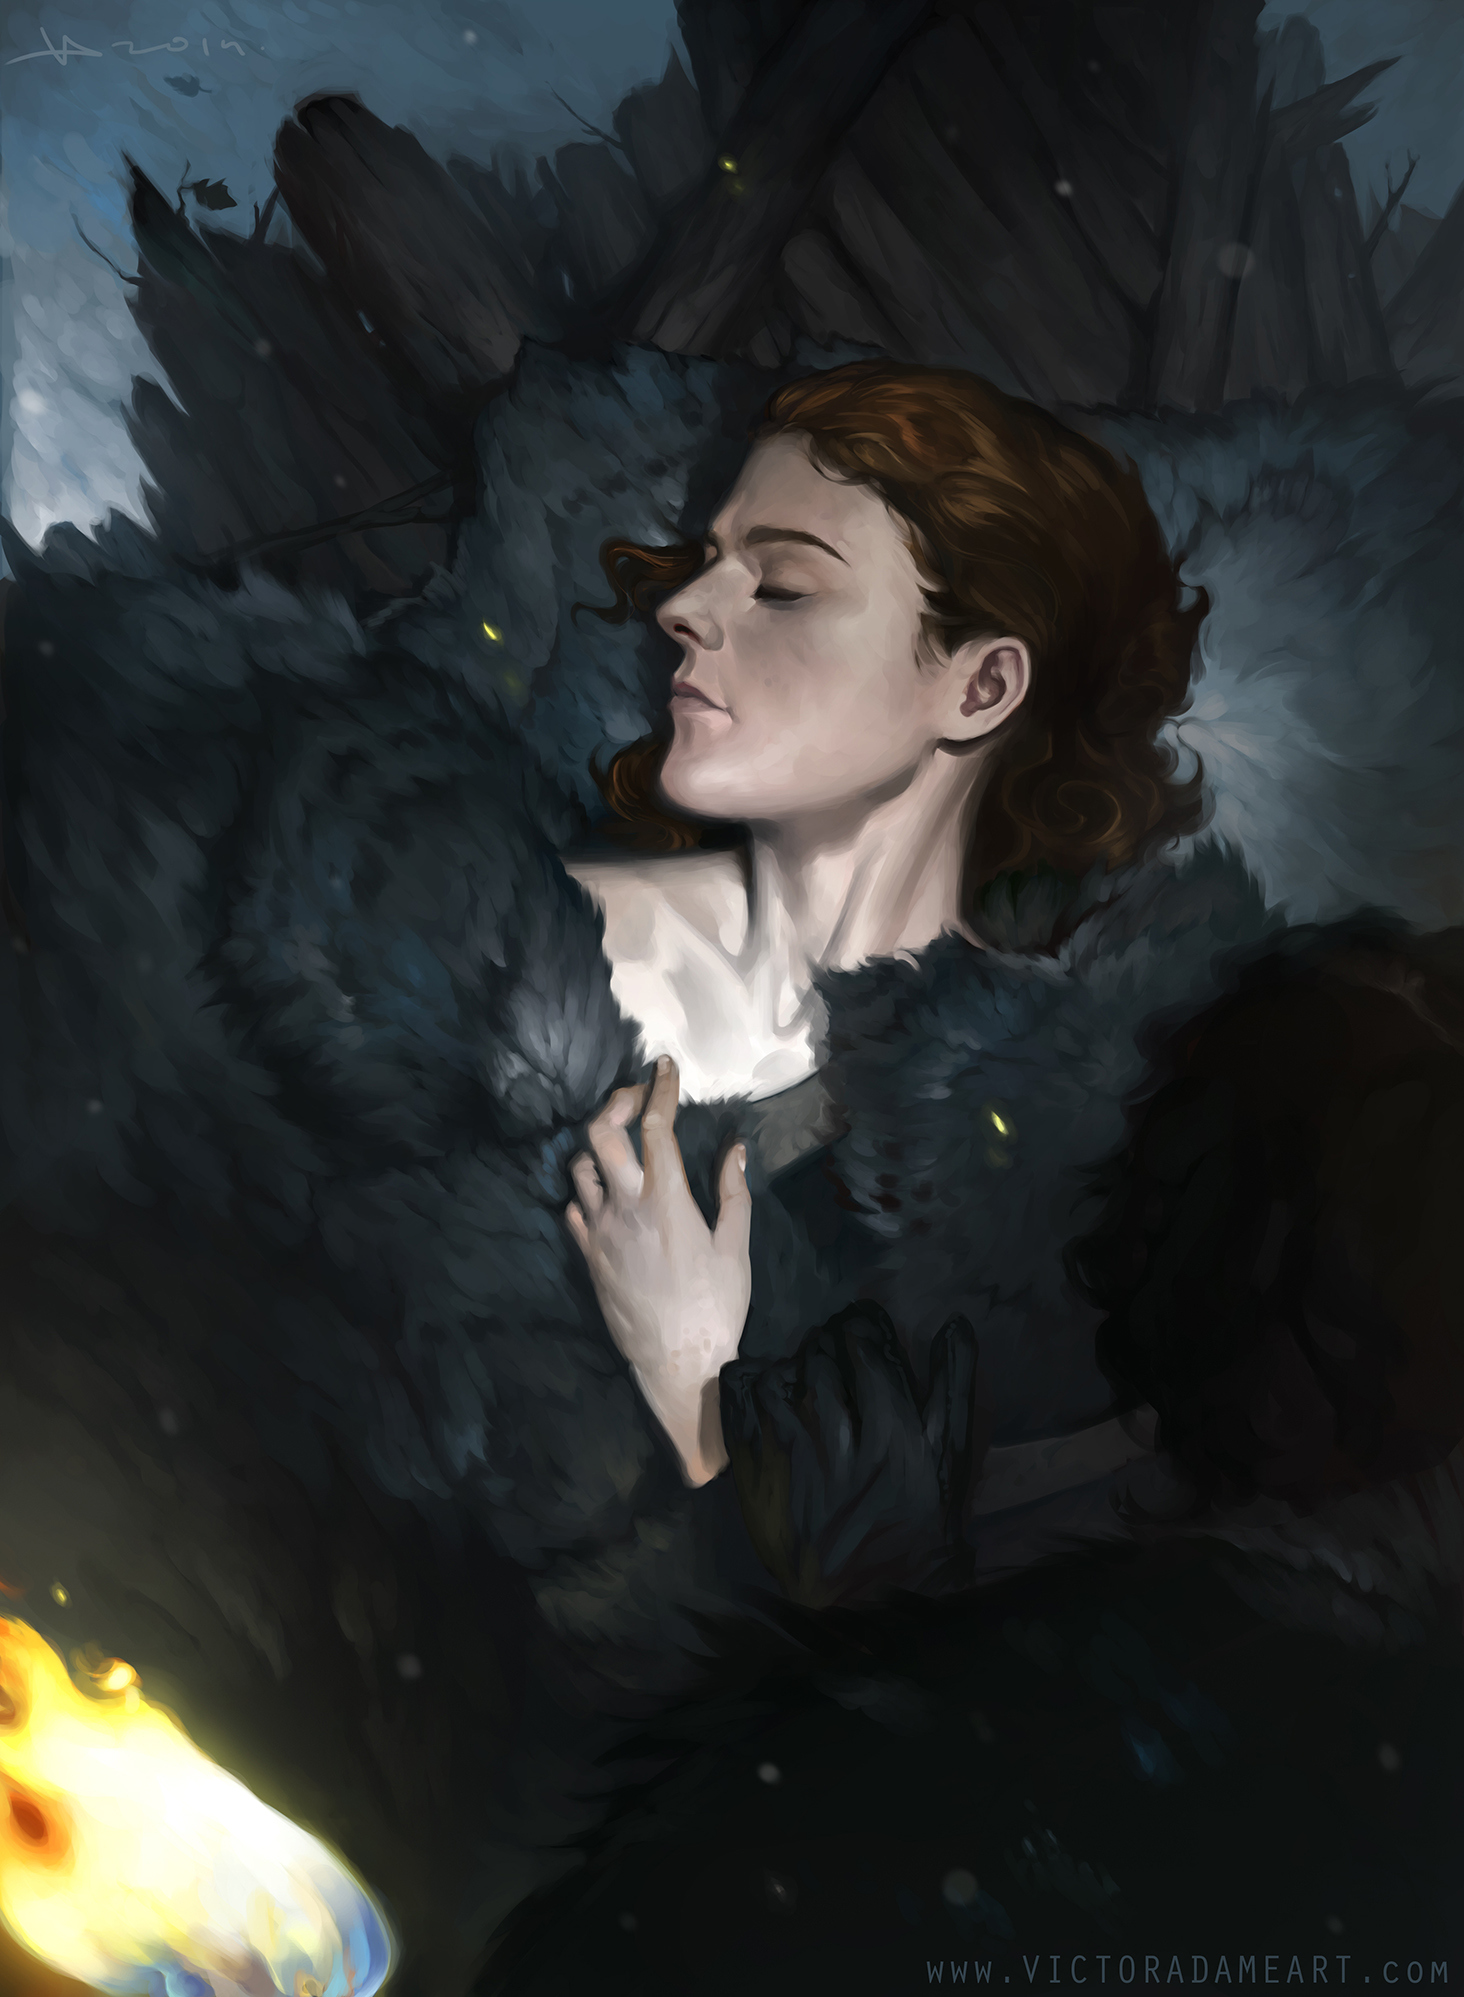 Game of Thrones Concept Art and Illustrations I | Concept Art World